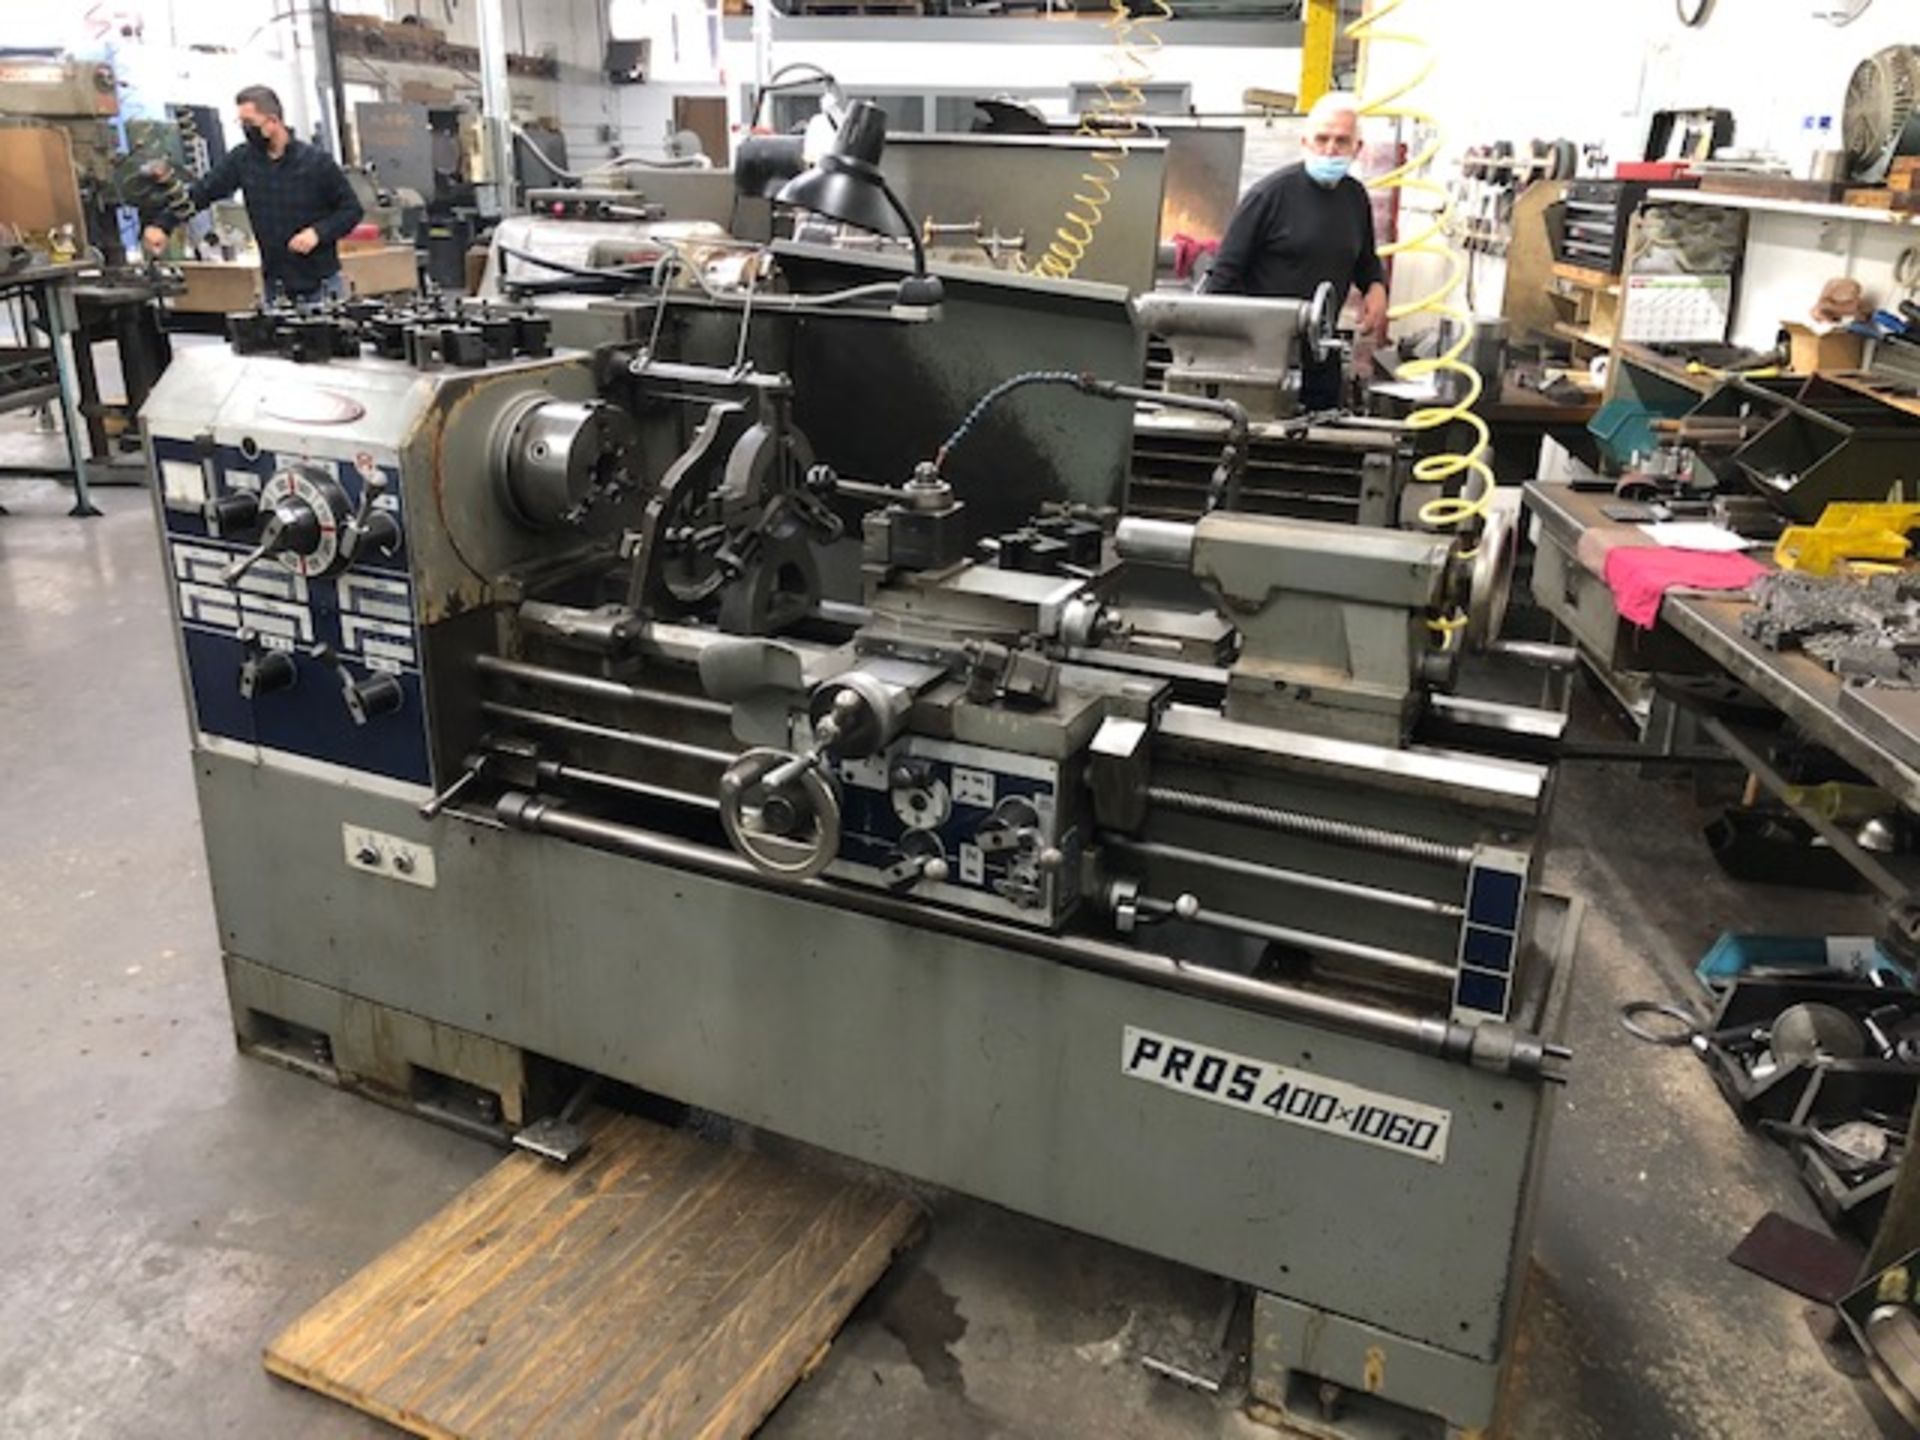 TUDA PROS 15” X 42” MODEL 400 X 1060 ENGINE LATHE: S/N 5VP12145; SPINDLE SPEEDS FROM 300 TO 1,500 - Image 2 of 2